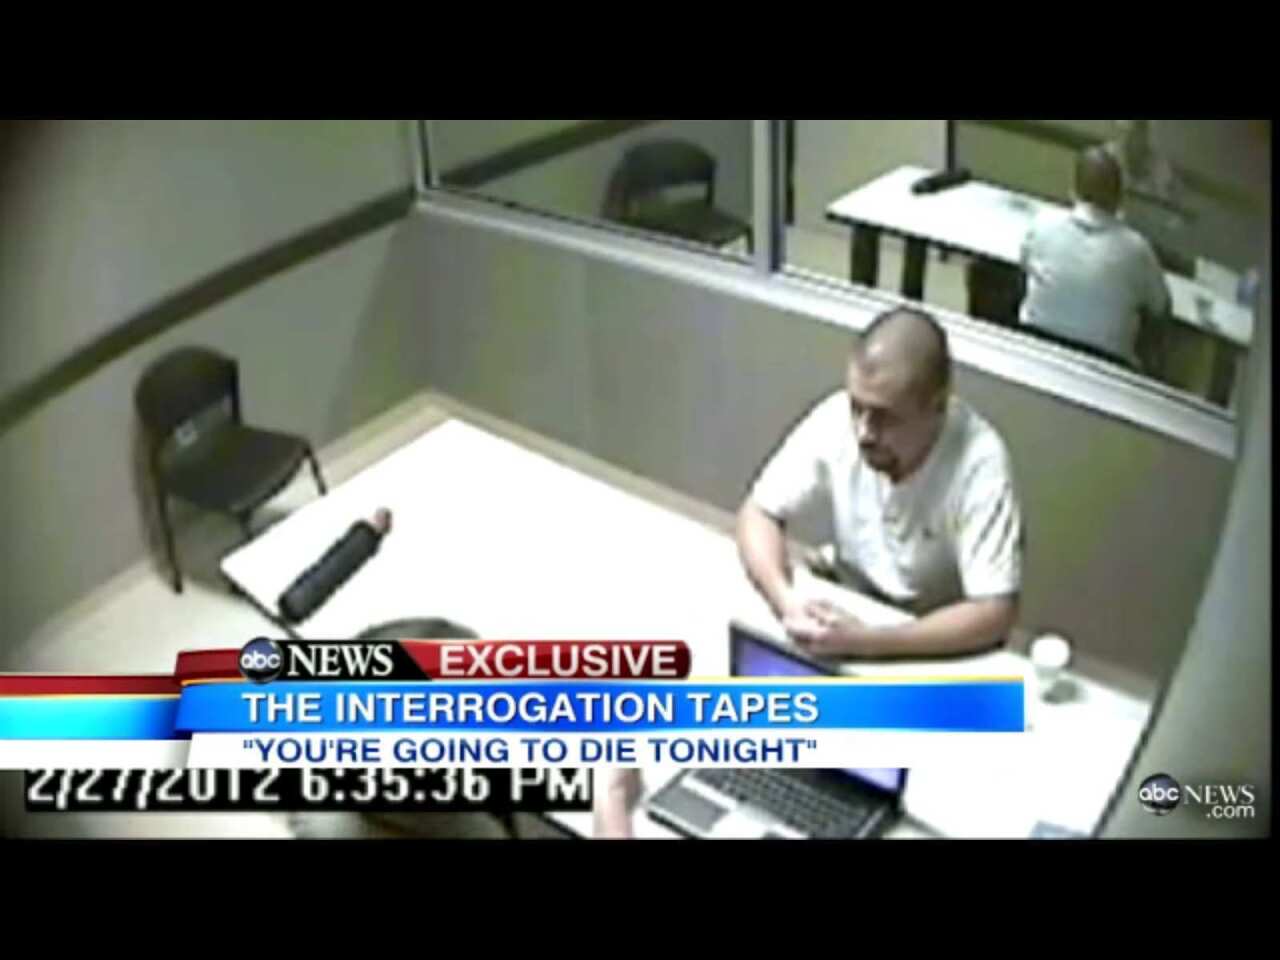 This video frame shows suspect George Zimmerman as he is questioned by investigators in the shooting of Trayvon Martin. The interrogation took place on Feb. 27, the day after the shooting. Zimmerman was then released, with police later claiming they had insufficient evidence to make an arrest. More: Zimmerman called police on night of shooting, was told to stay away